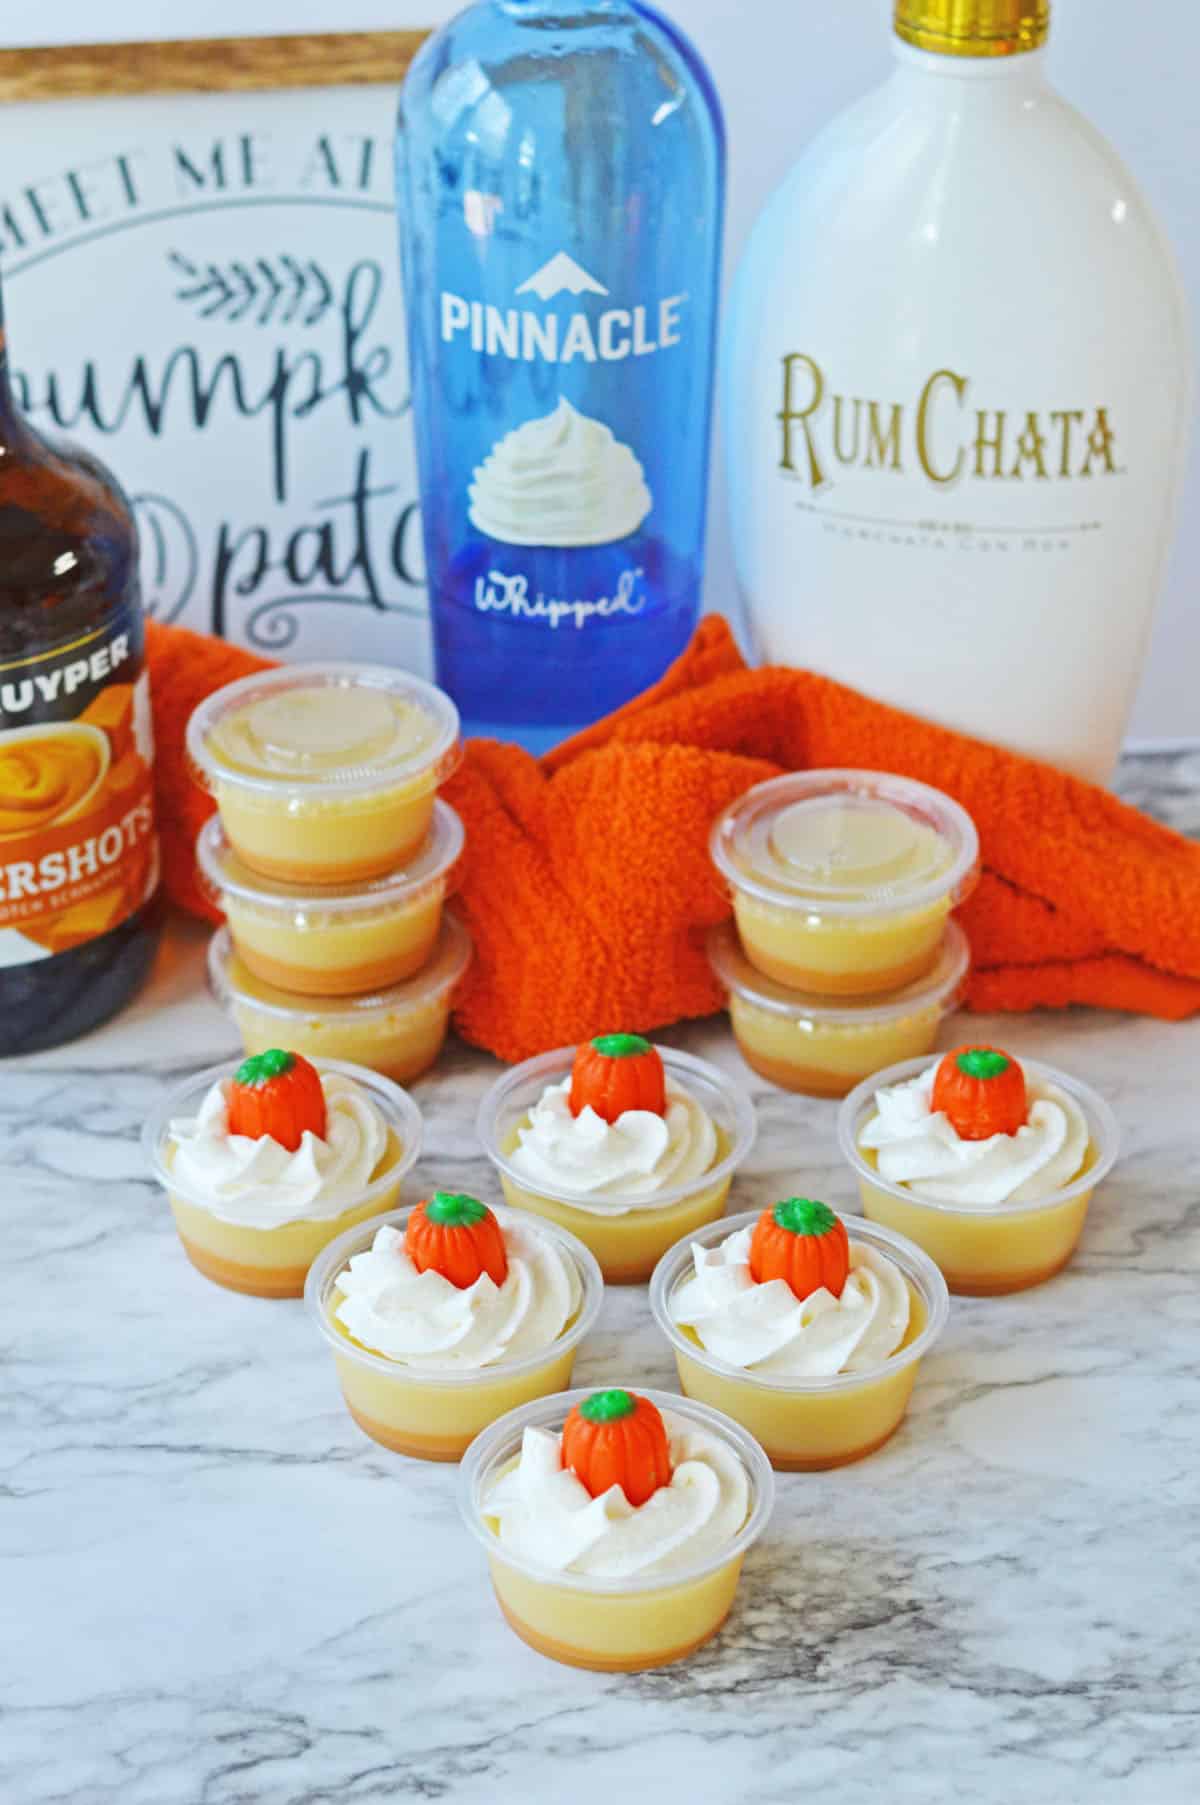 Pumpkin jello shots with whipped cream topped with pumpkin candy, with vodka, rum, and schnapps in background.